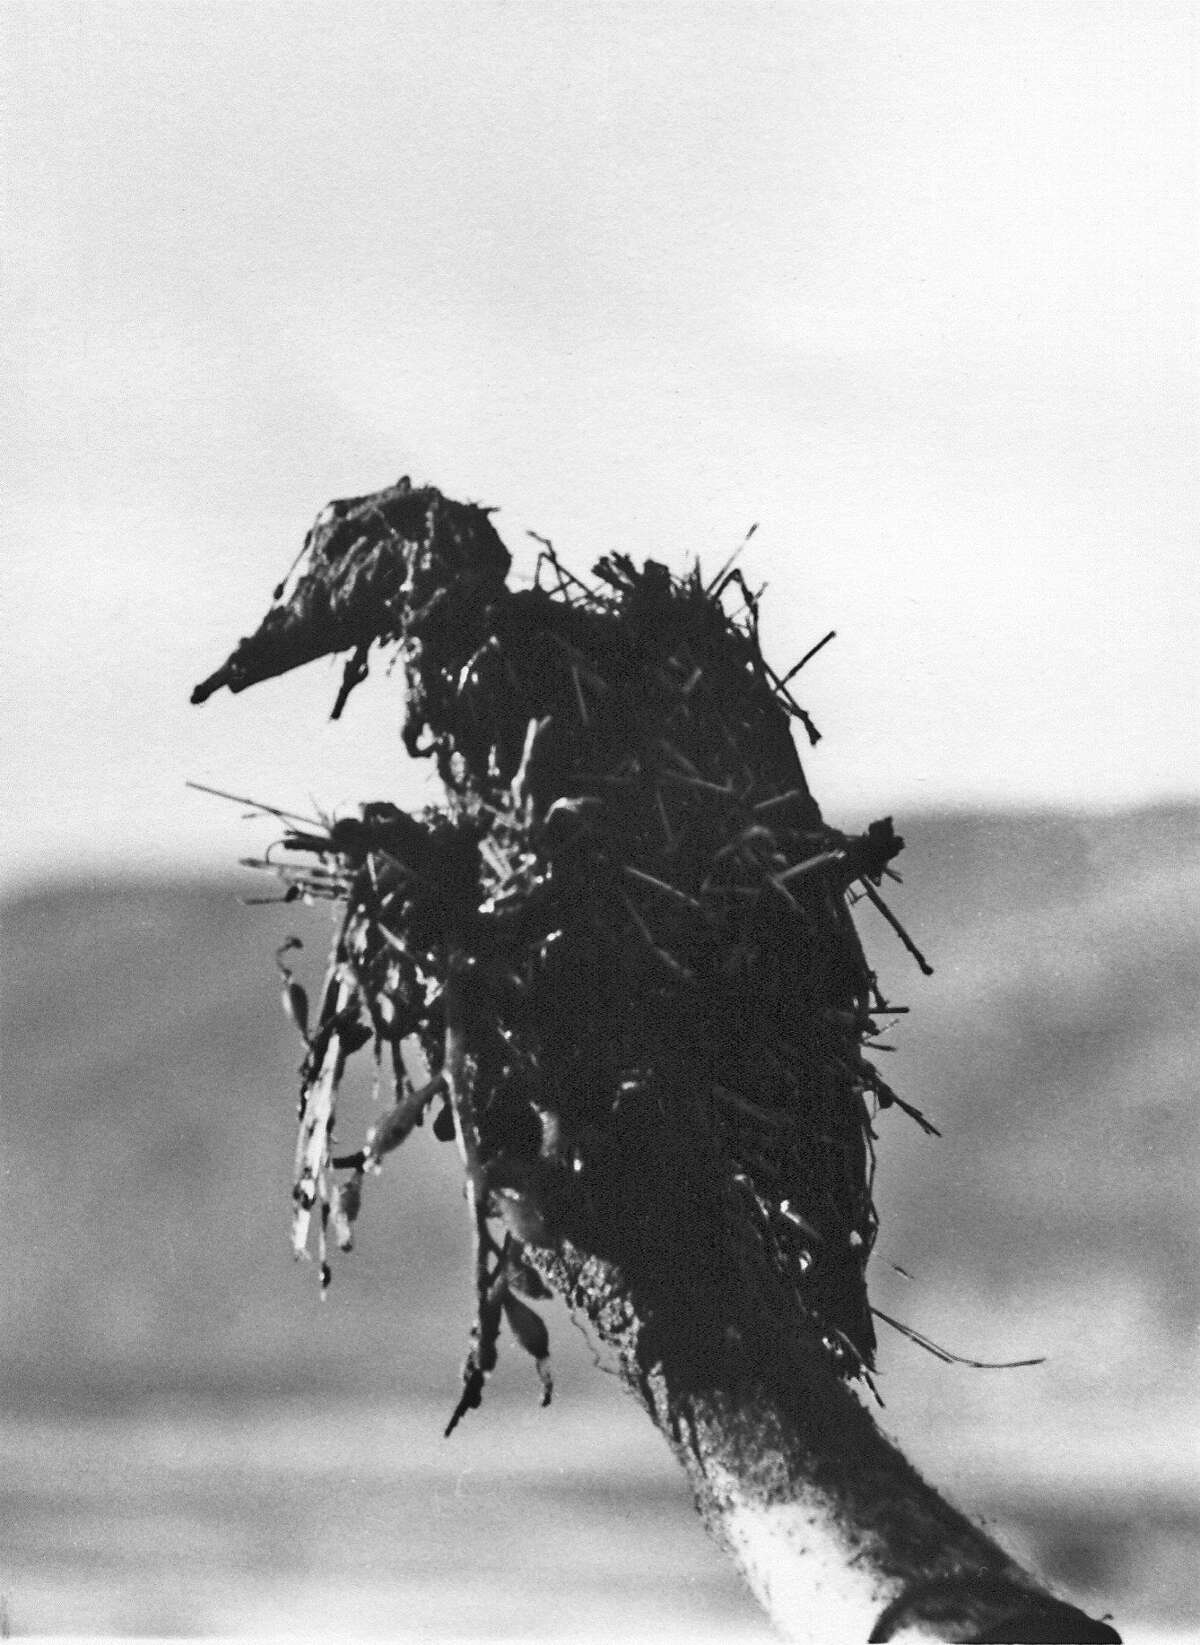 Grebe killed in Bolinas during the spill off the coast January 19 1971